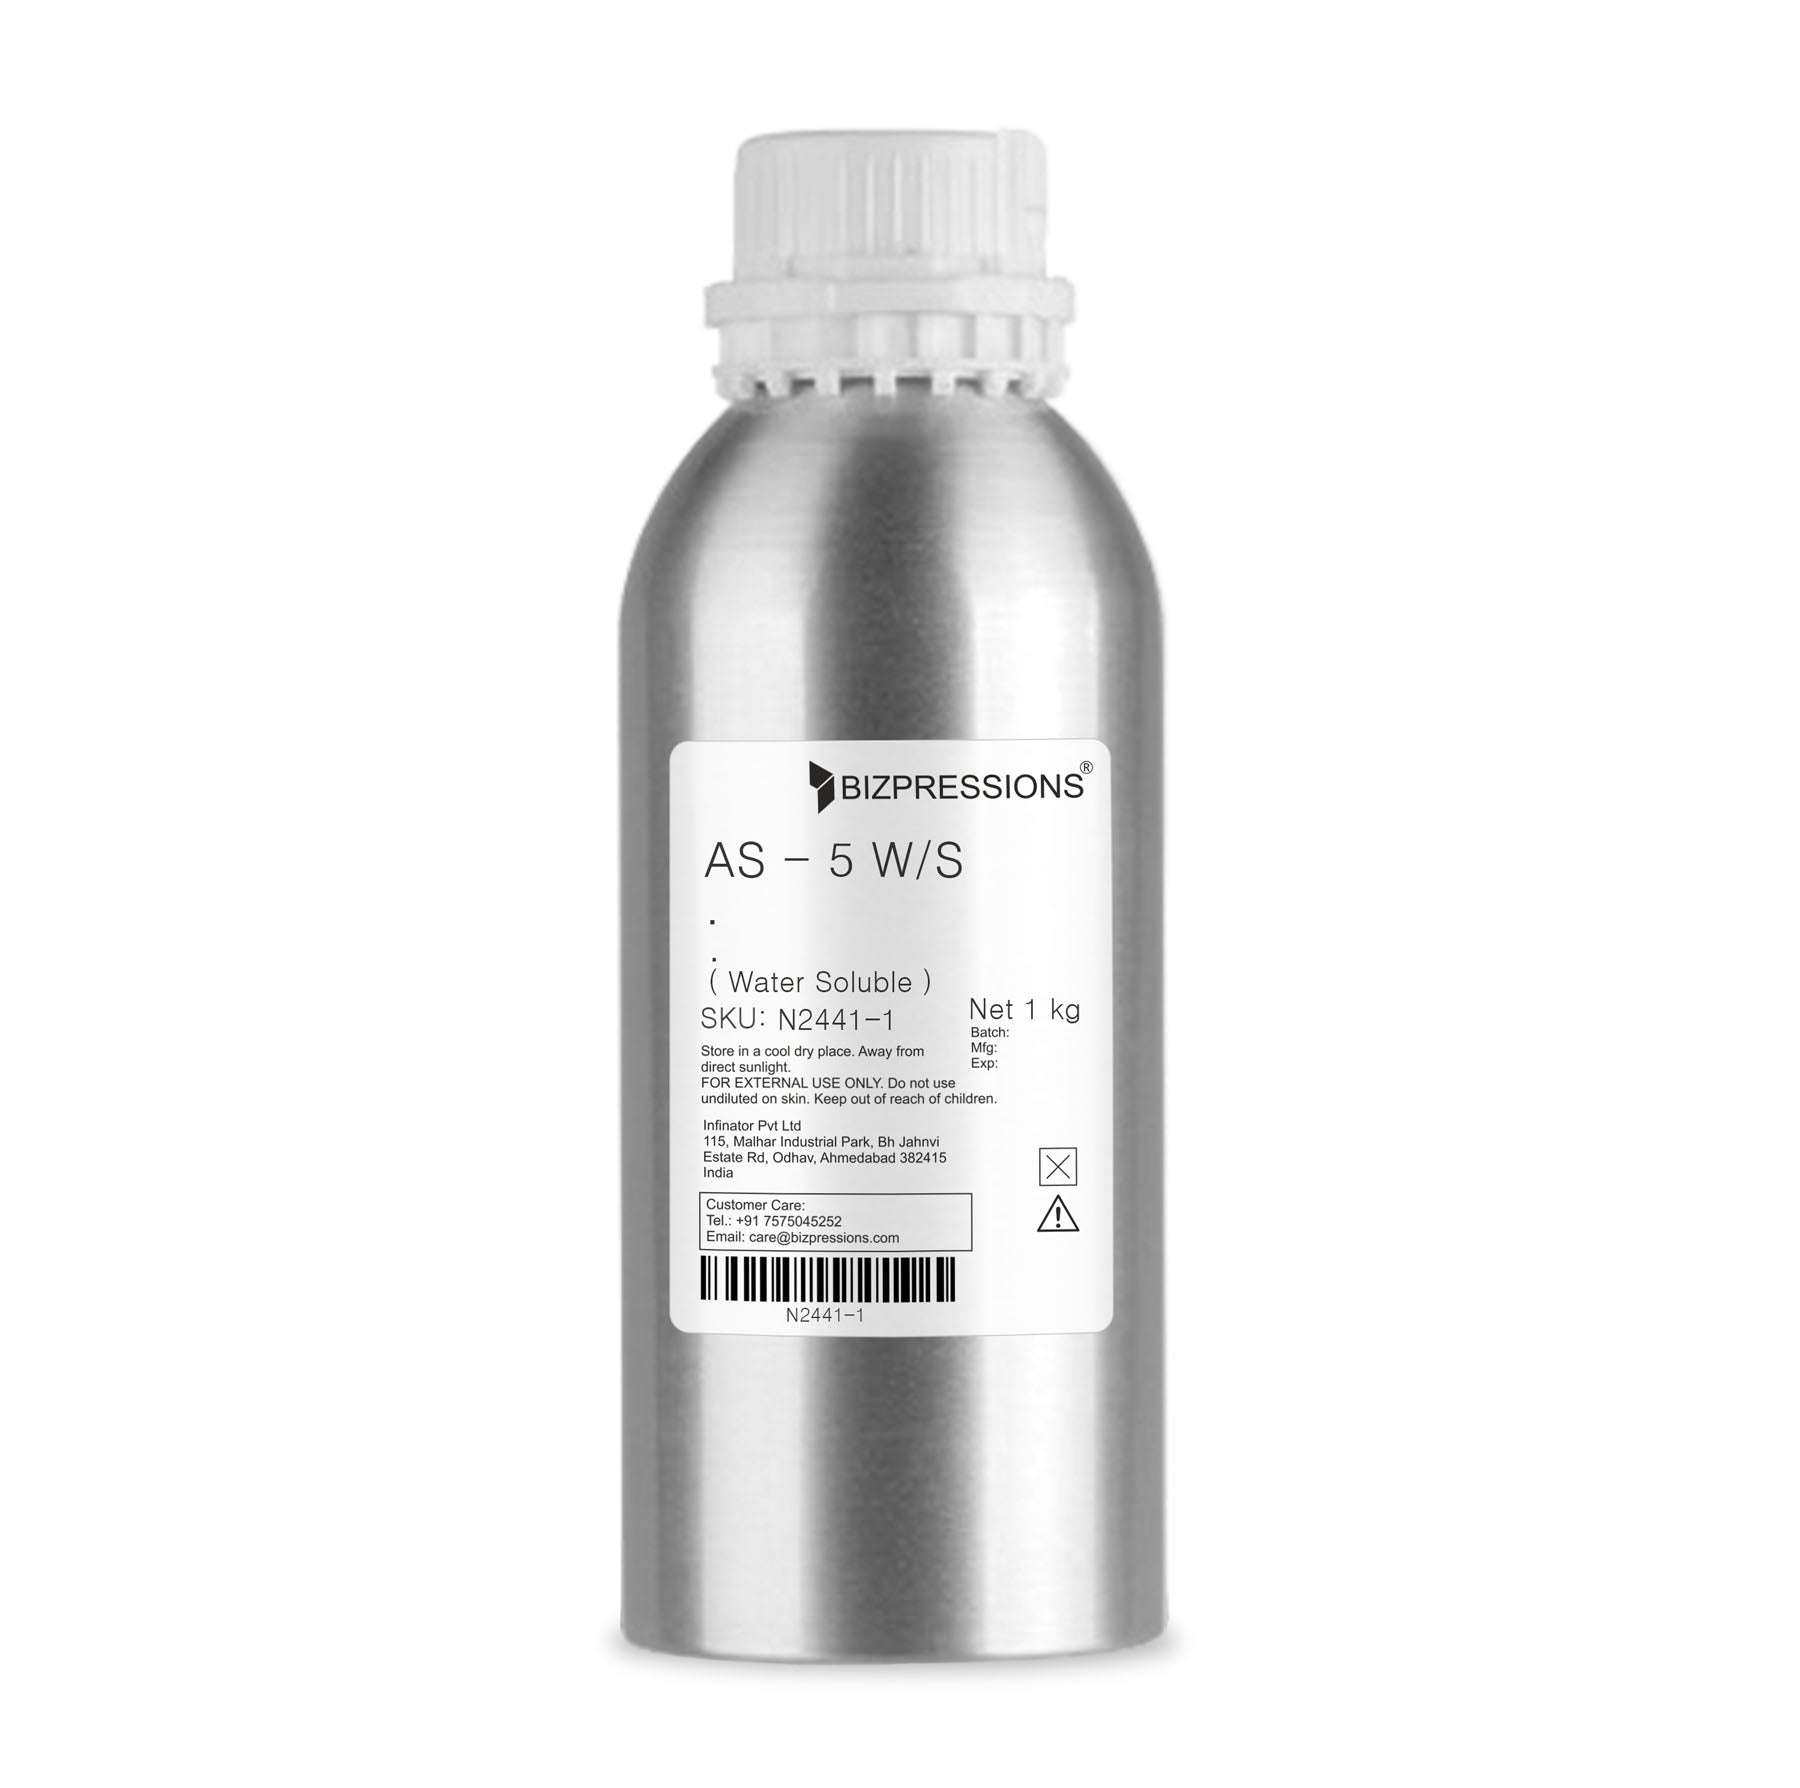 AS - 5 W/S - Fragrance ( Water Soluble ) - 1 kg